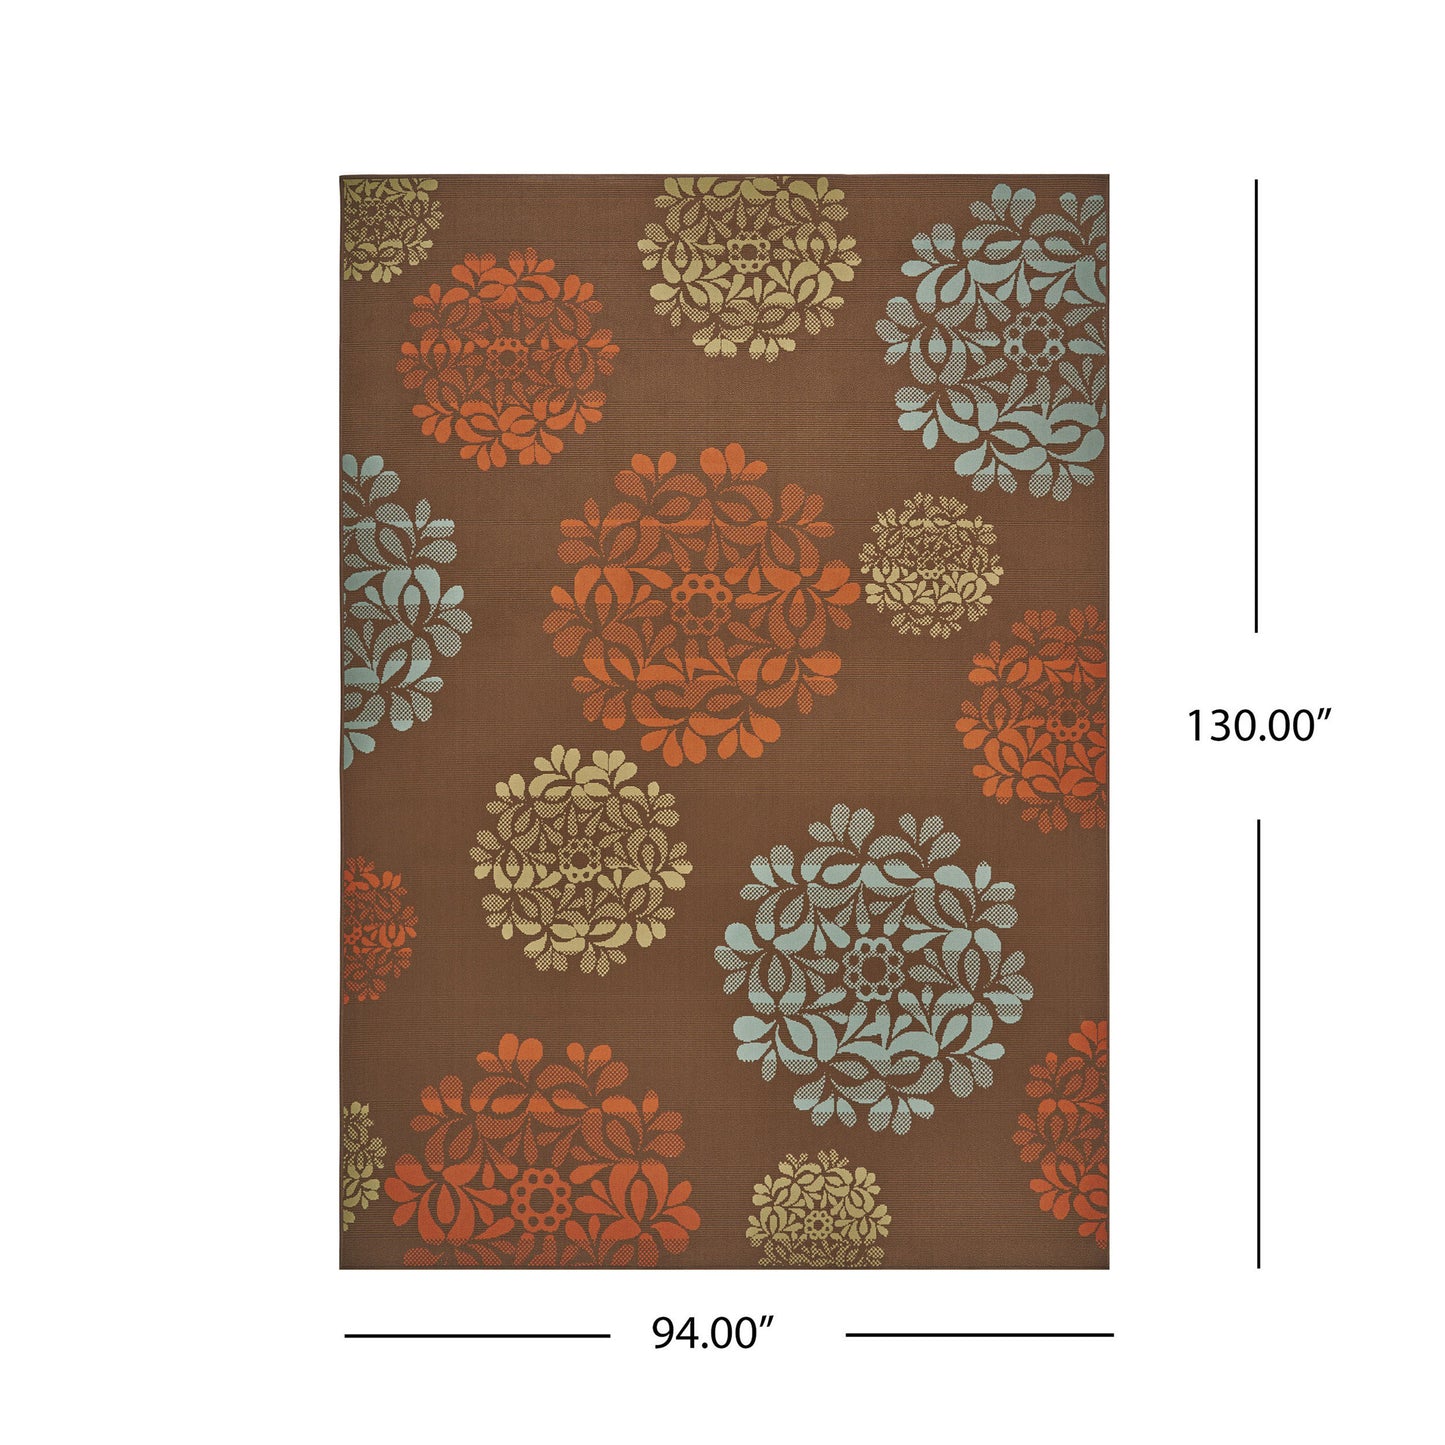 Sallie Outdoor Modern Brown Area Rug with Multi-Color Floral Print